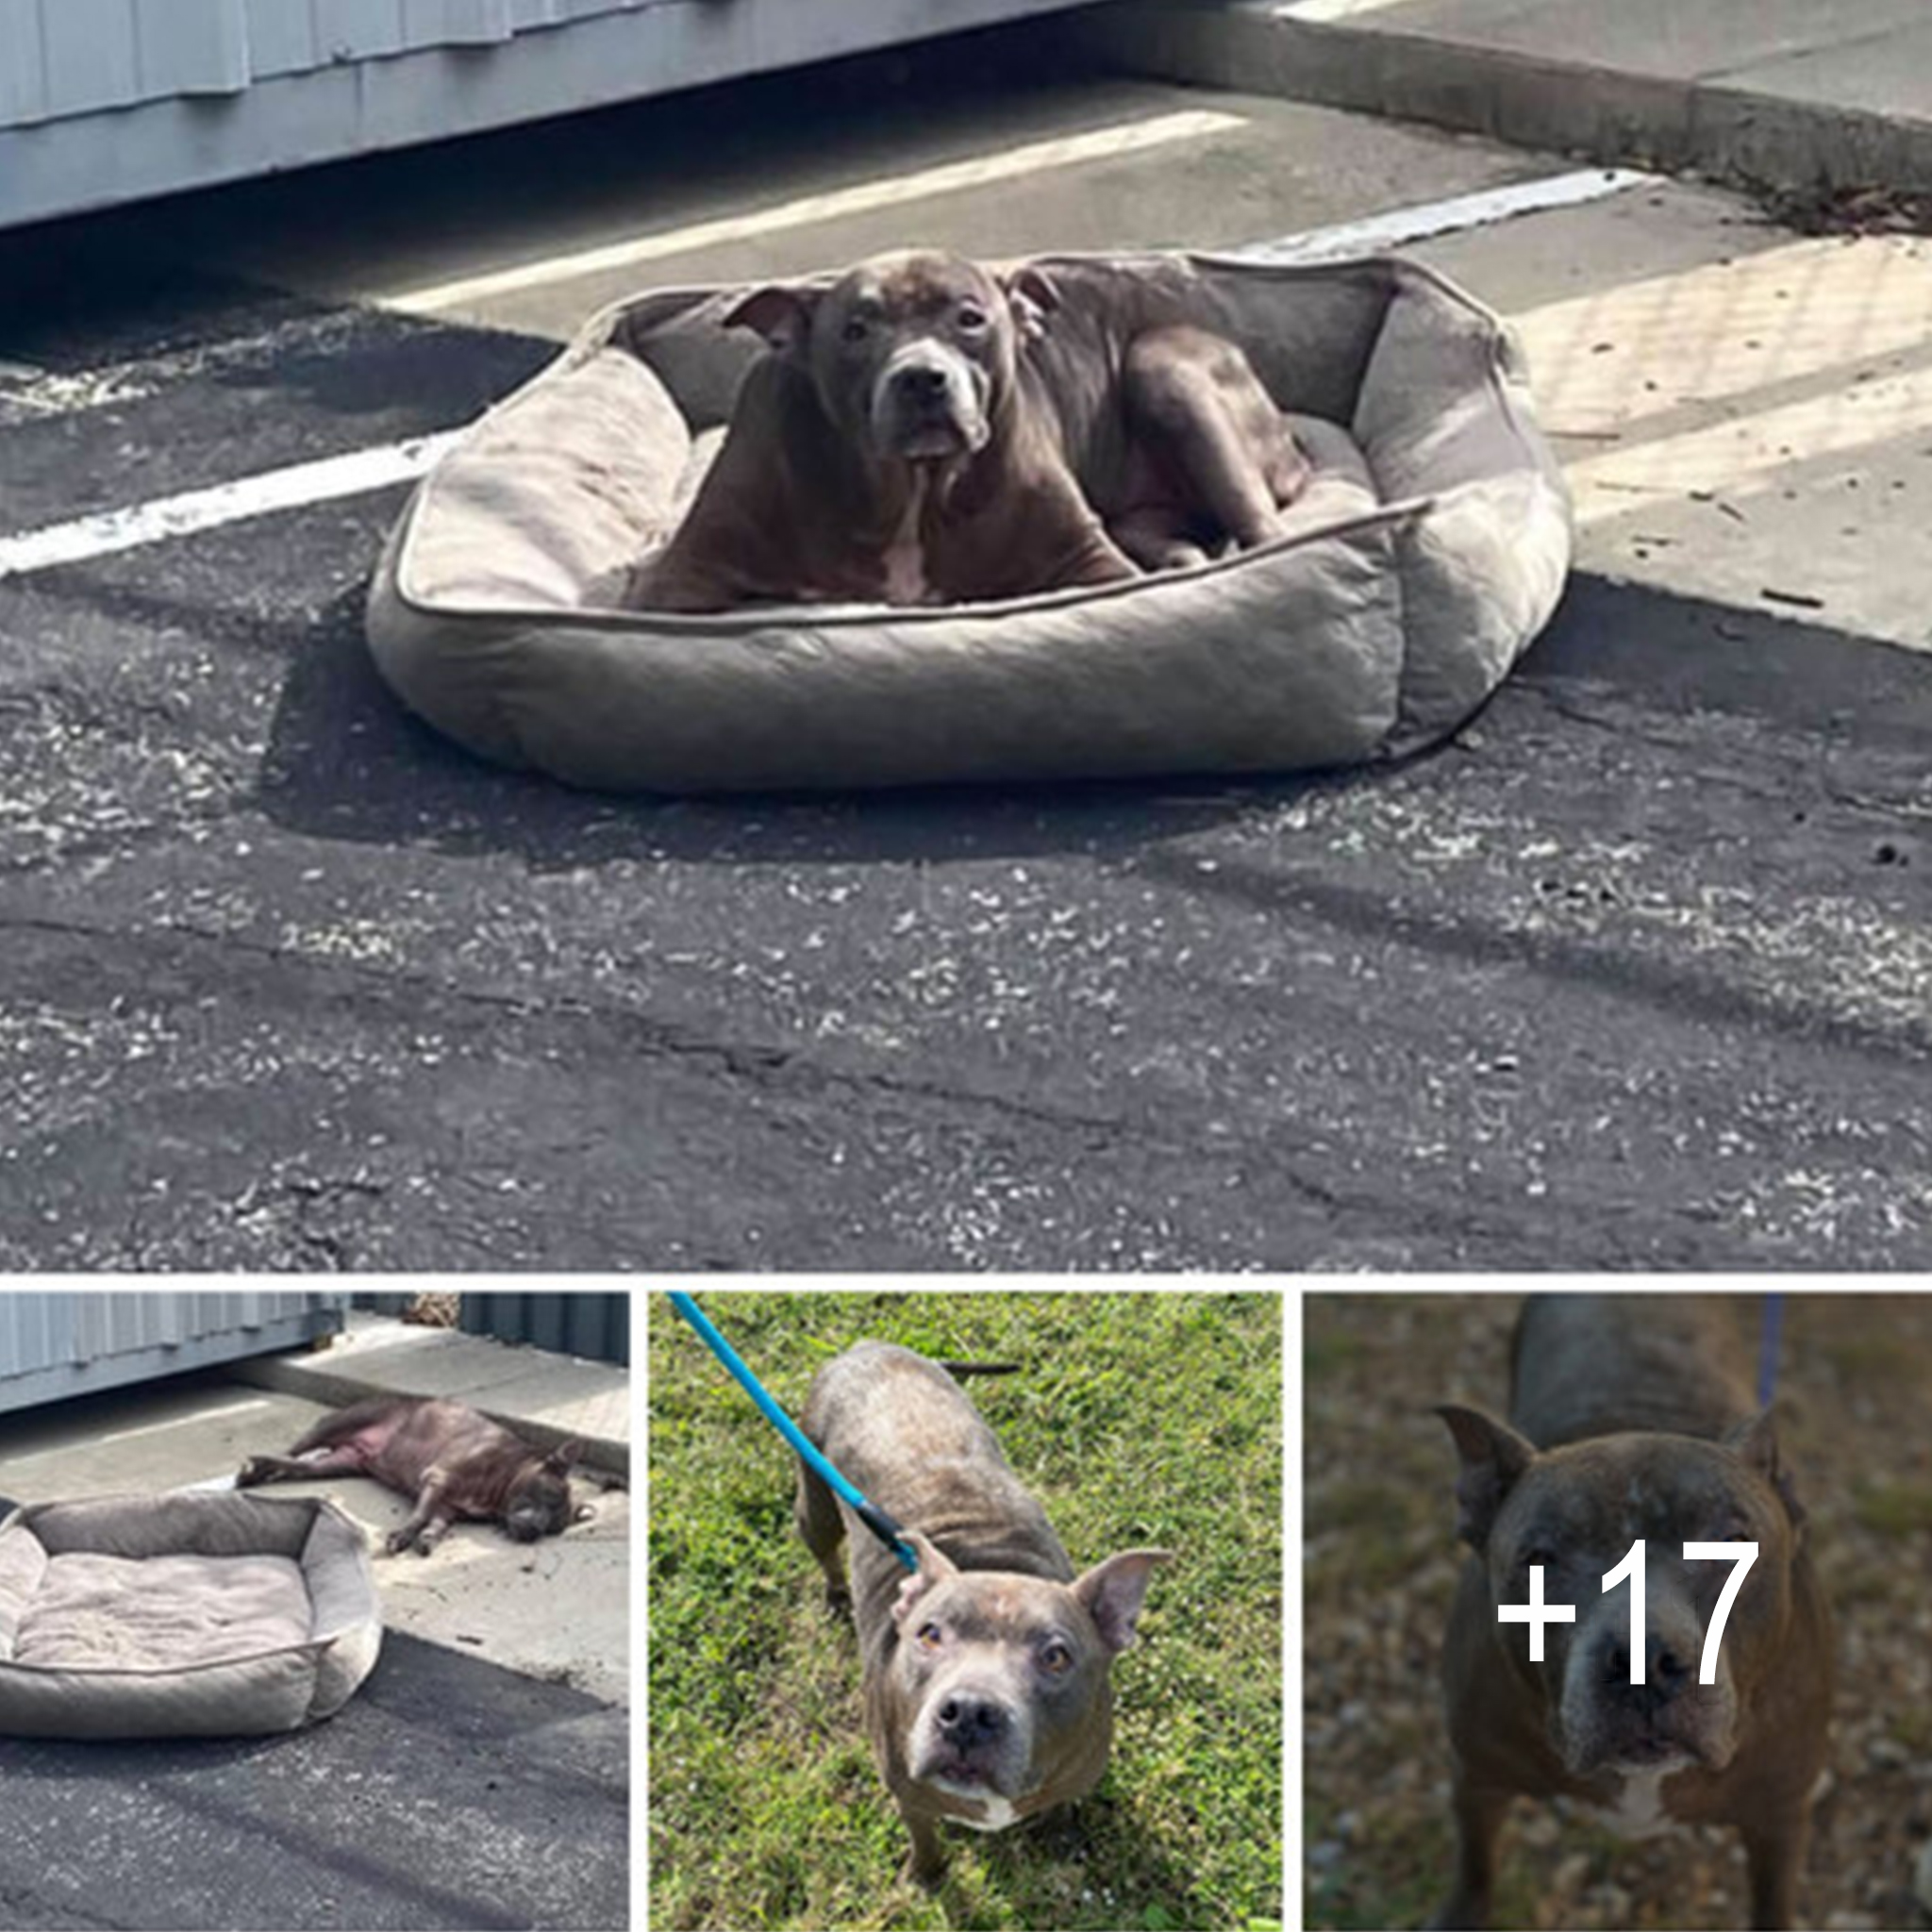 Aching Solitude: Dog Left Abandoned in Desolate Parking Lot, Seeking Solace on a Lonely Bed